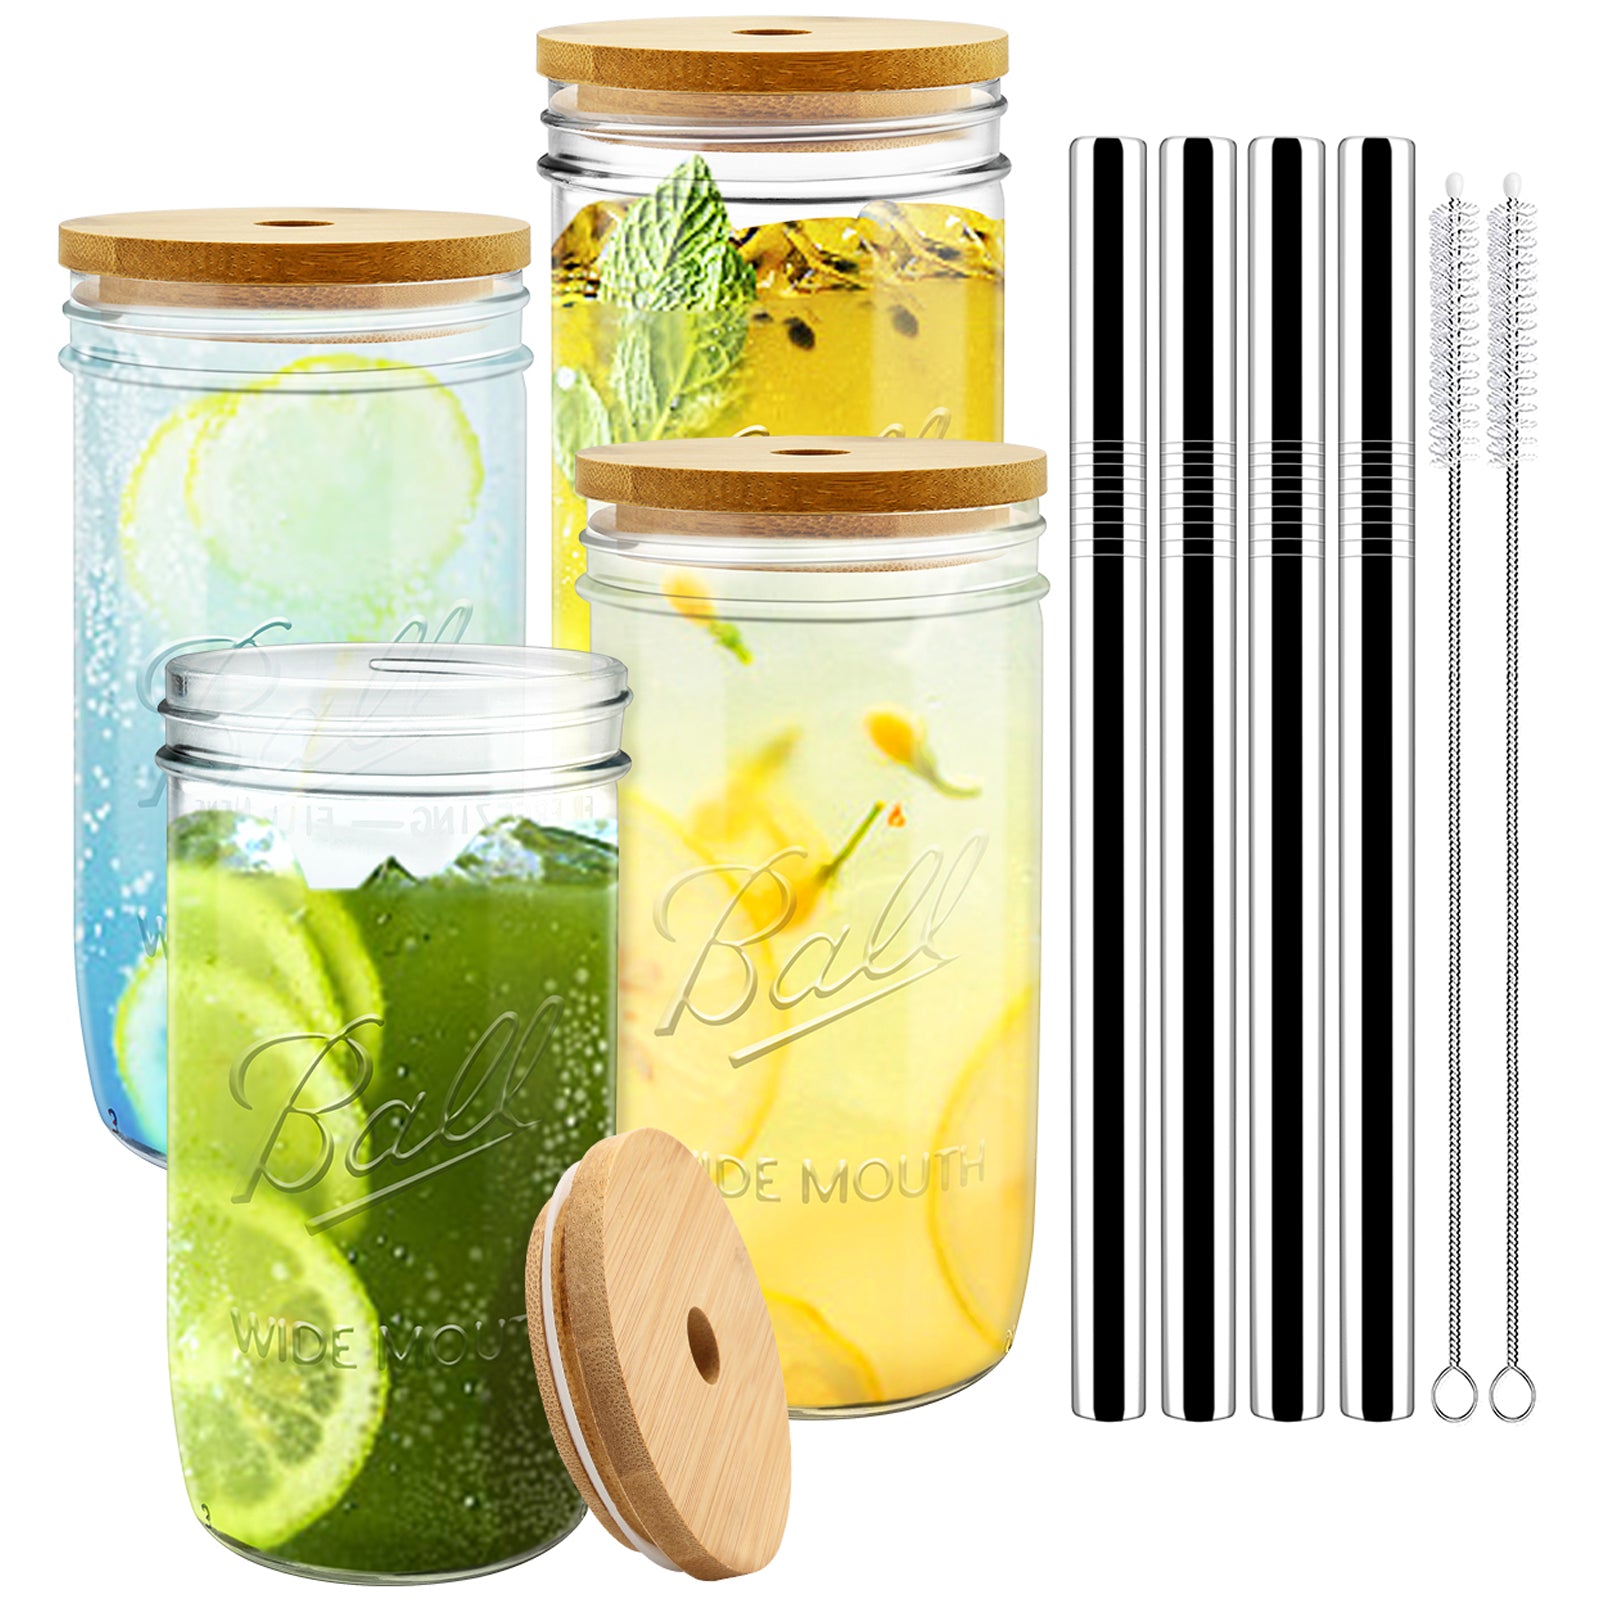  Mason Jar Lids with Straw, Reusable Bamboo Lids, Wide Mouth Mason  Jar Tumbler Lids, Mason Jar Tops with 2 Reusable Stainless Steel Straw - 2  Packs: Home & Kitchen